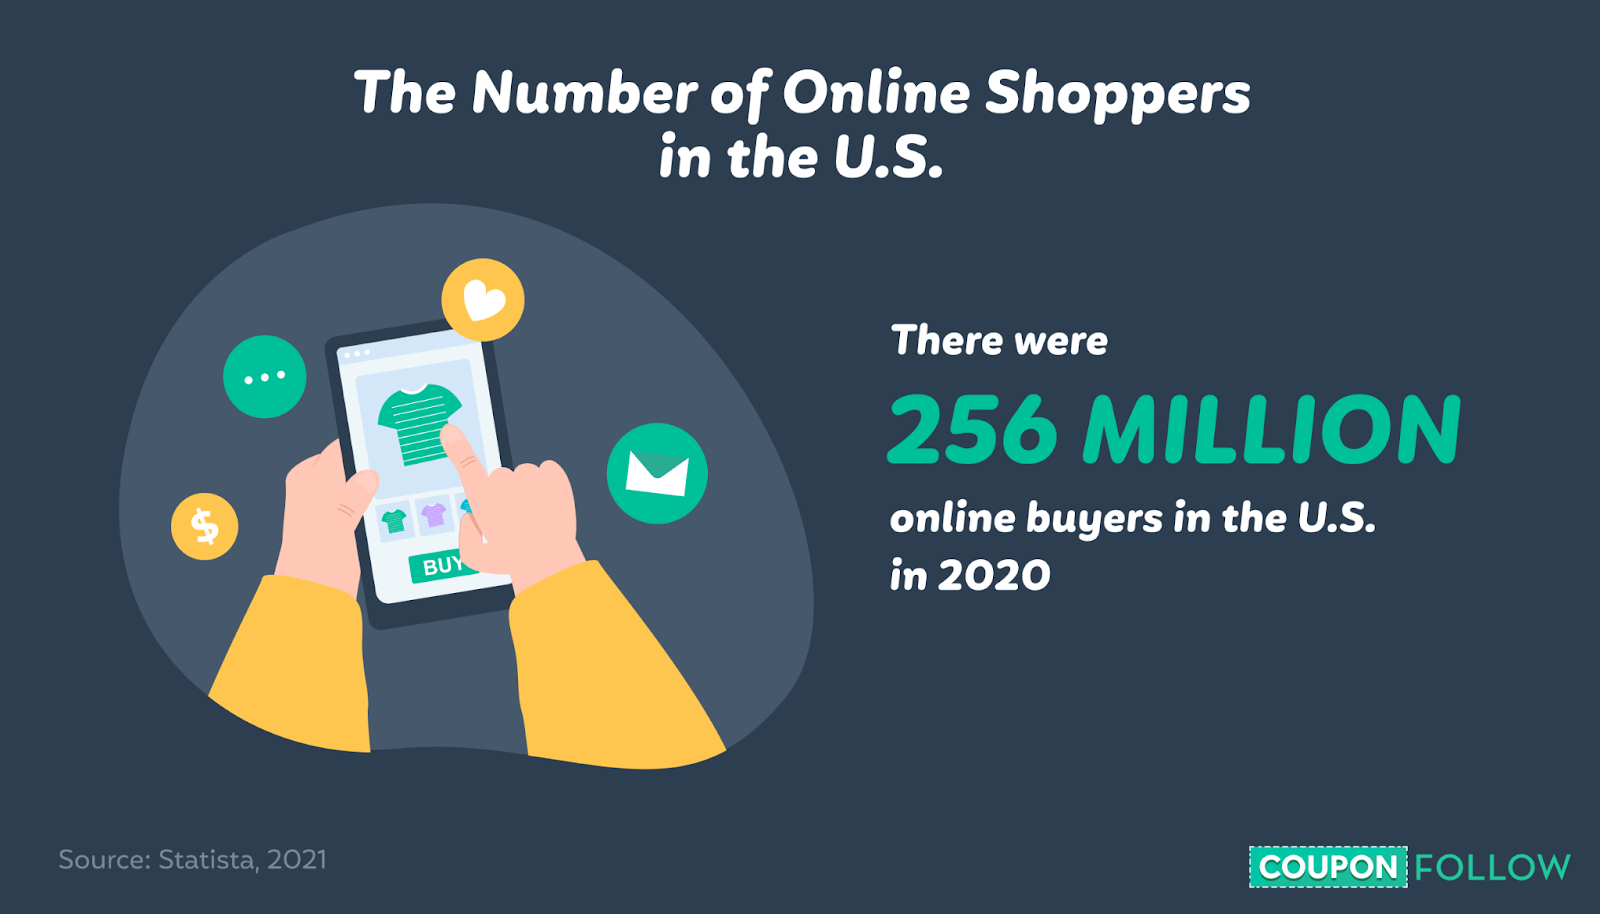  Illustration showing the number of online shoppers in the U.S. in 2020